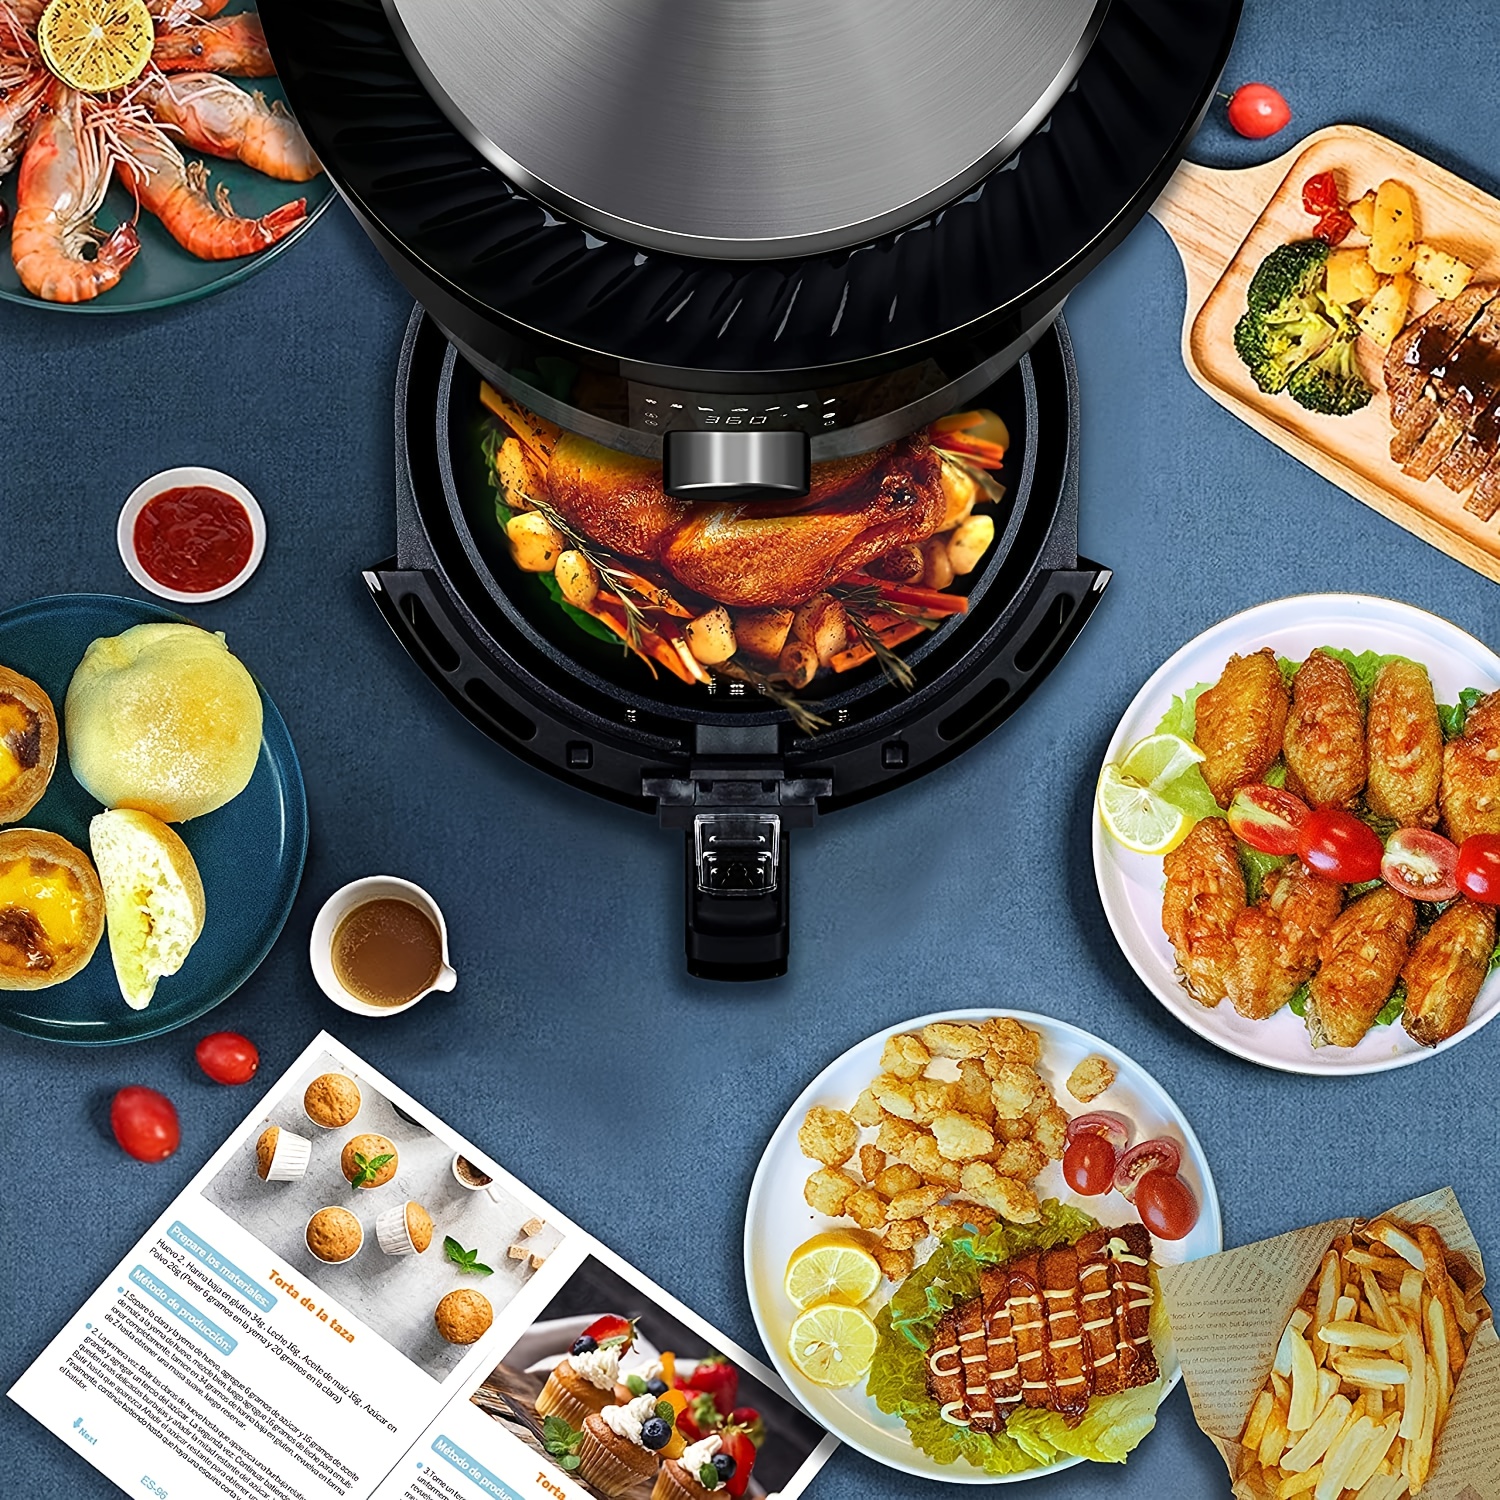 air fryer 3 6 quart family electric oilless hot air fryer oven with non stick basket and rack touch screen and knob 8 preset modes led display suitable for home party office 1350w details 8